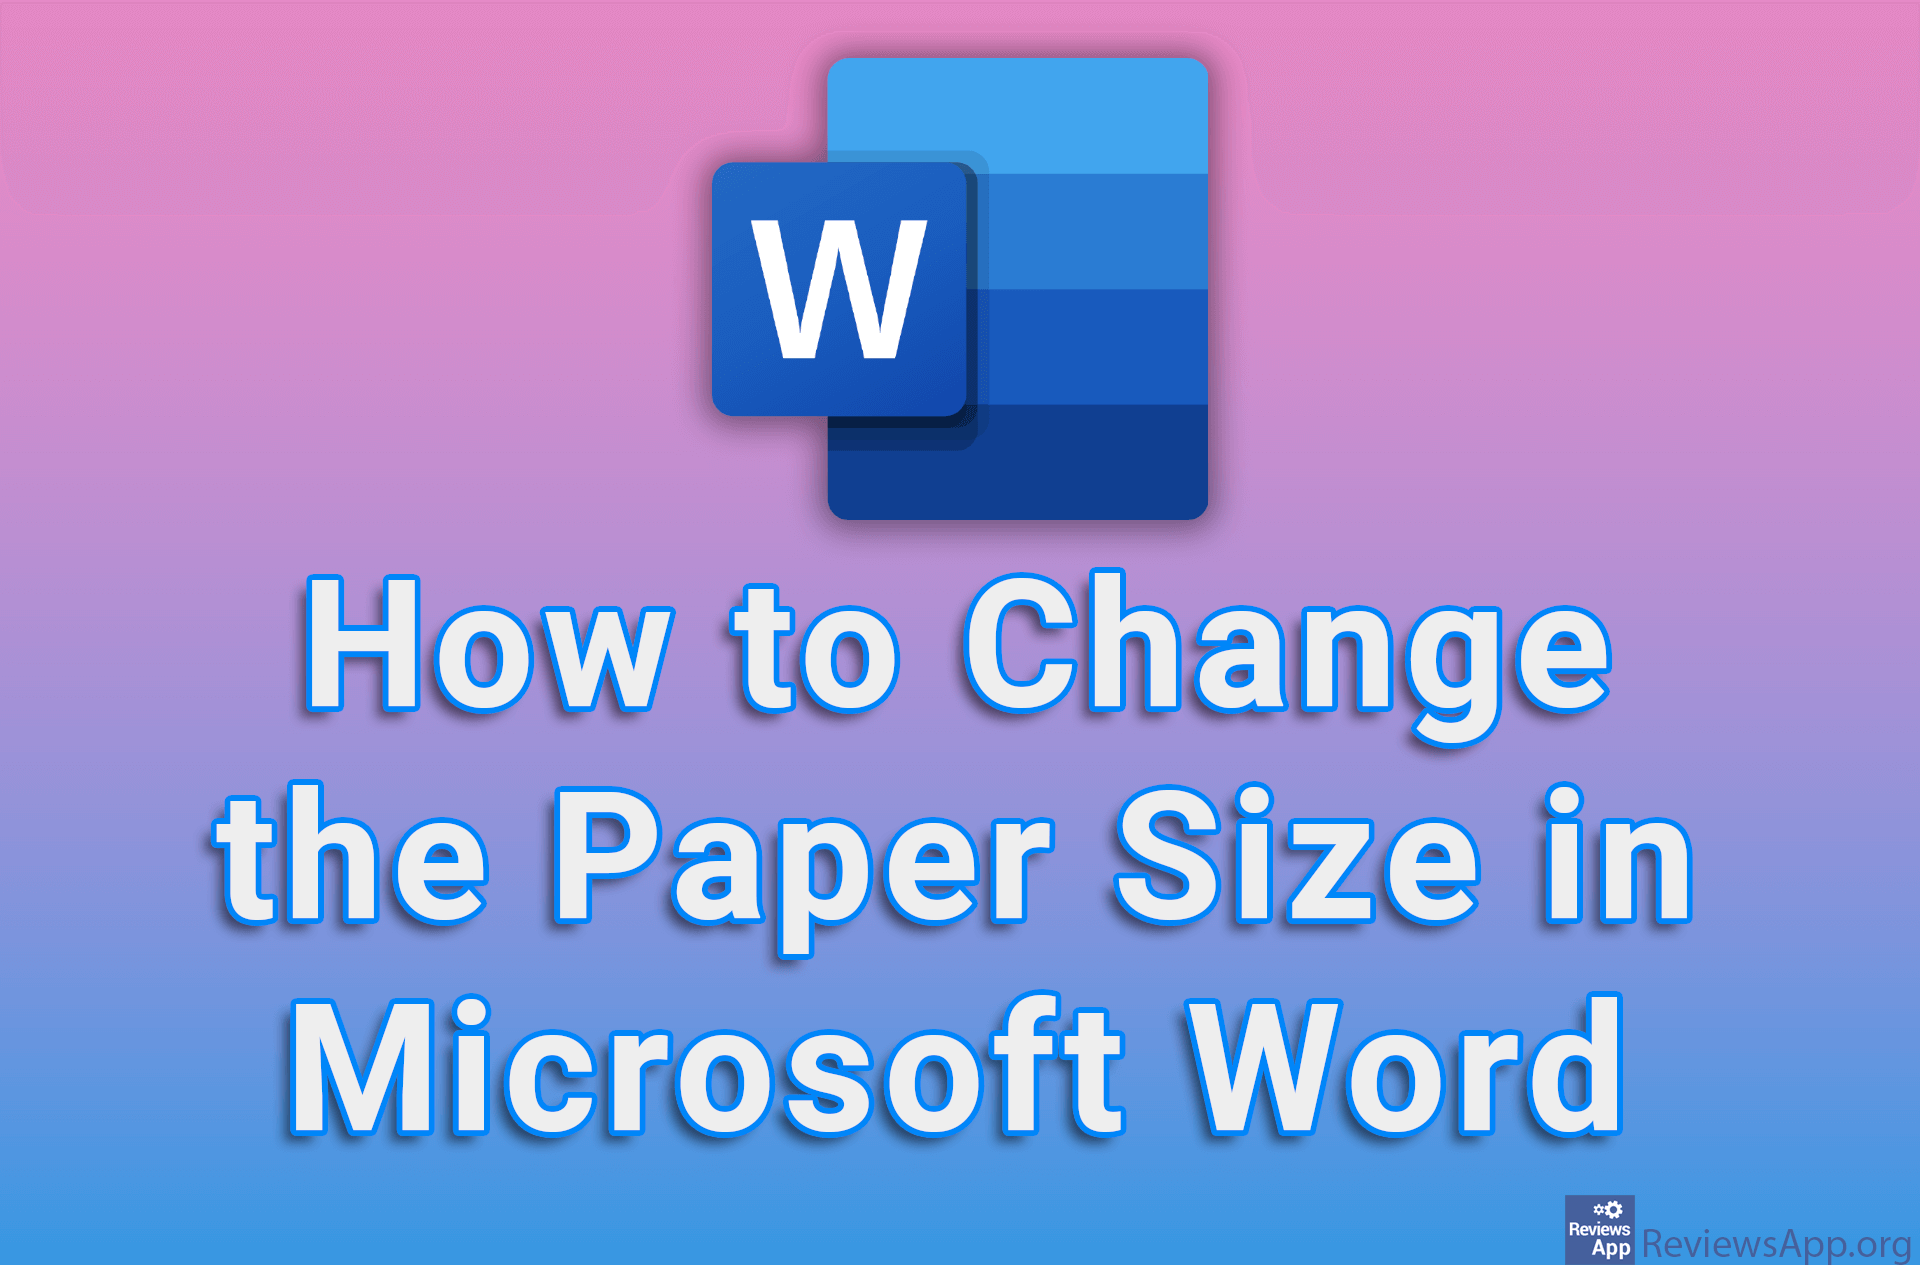 How to Change the Paper Size in Microsoft Word